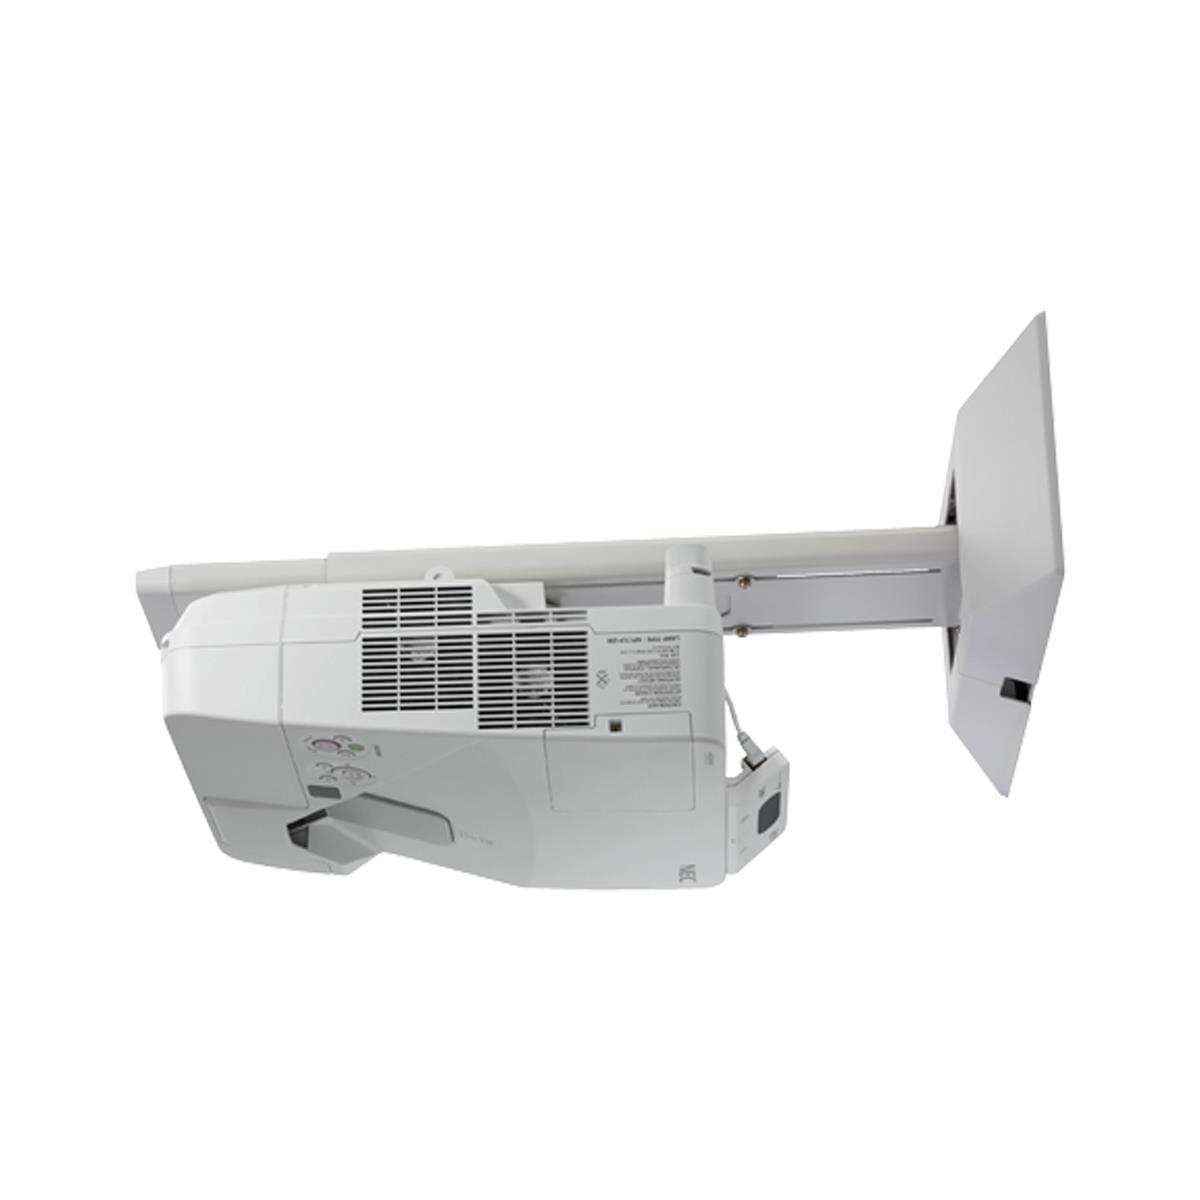 

NEC NP04WK1 Ultra-Short Throw Wall Mount for NP-UM330W and NP-UM330X Projectors